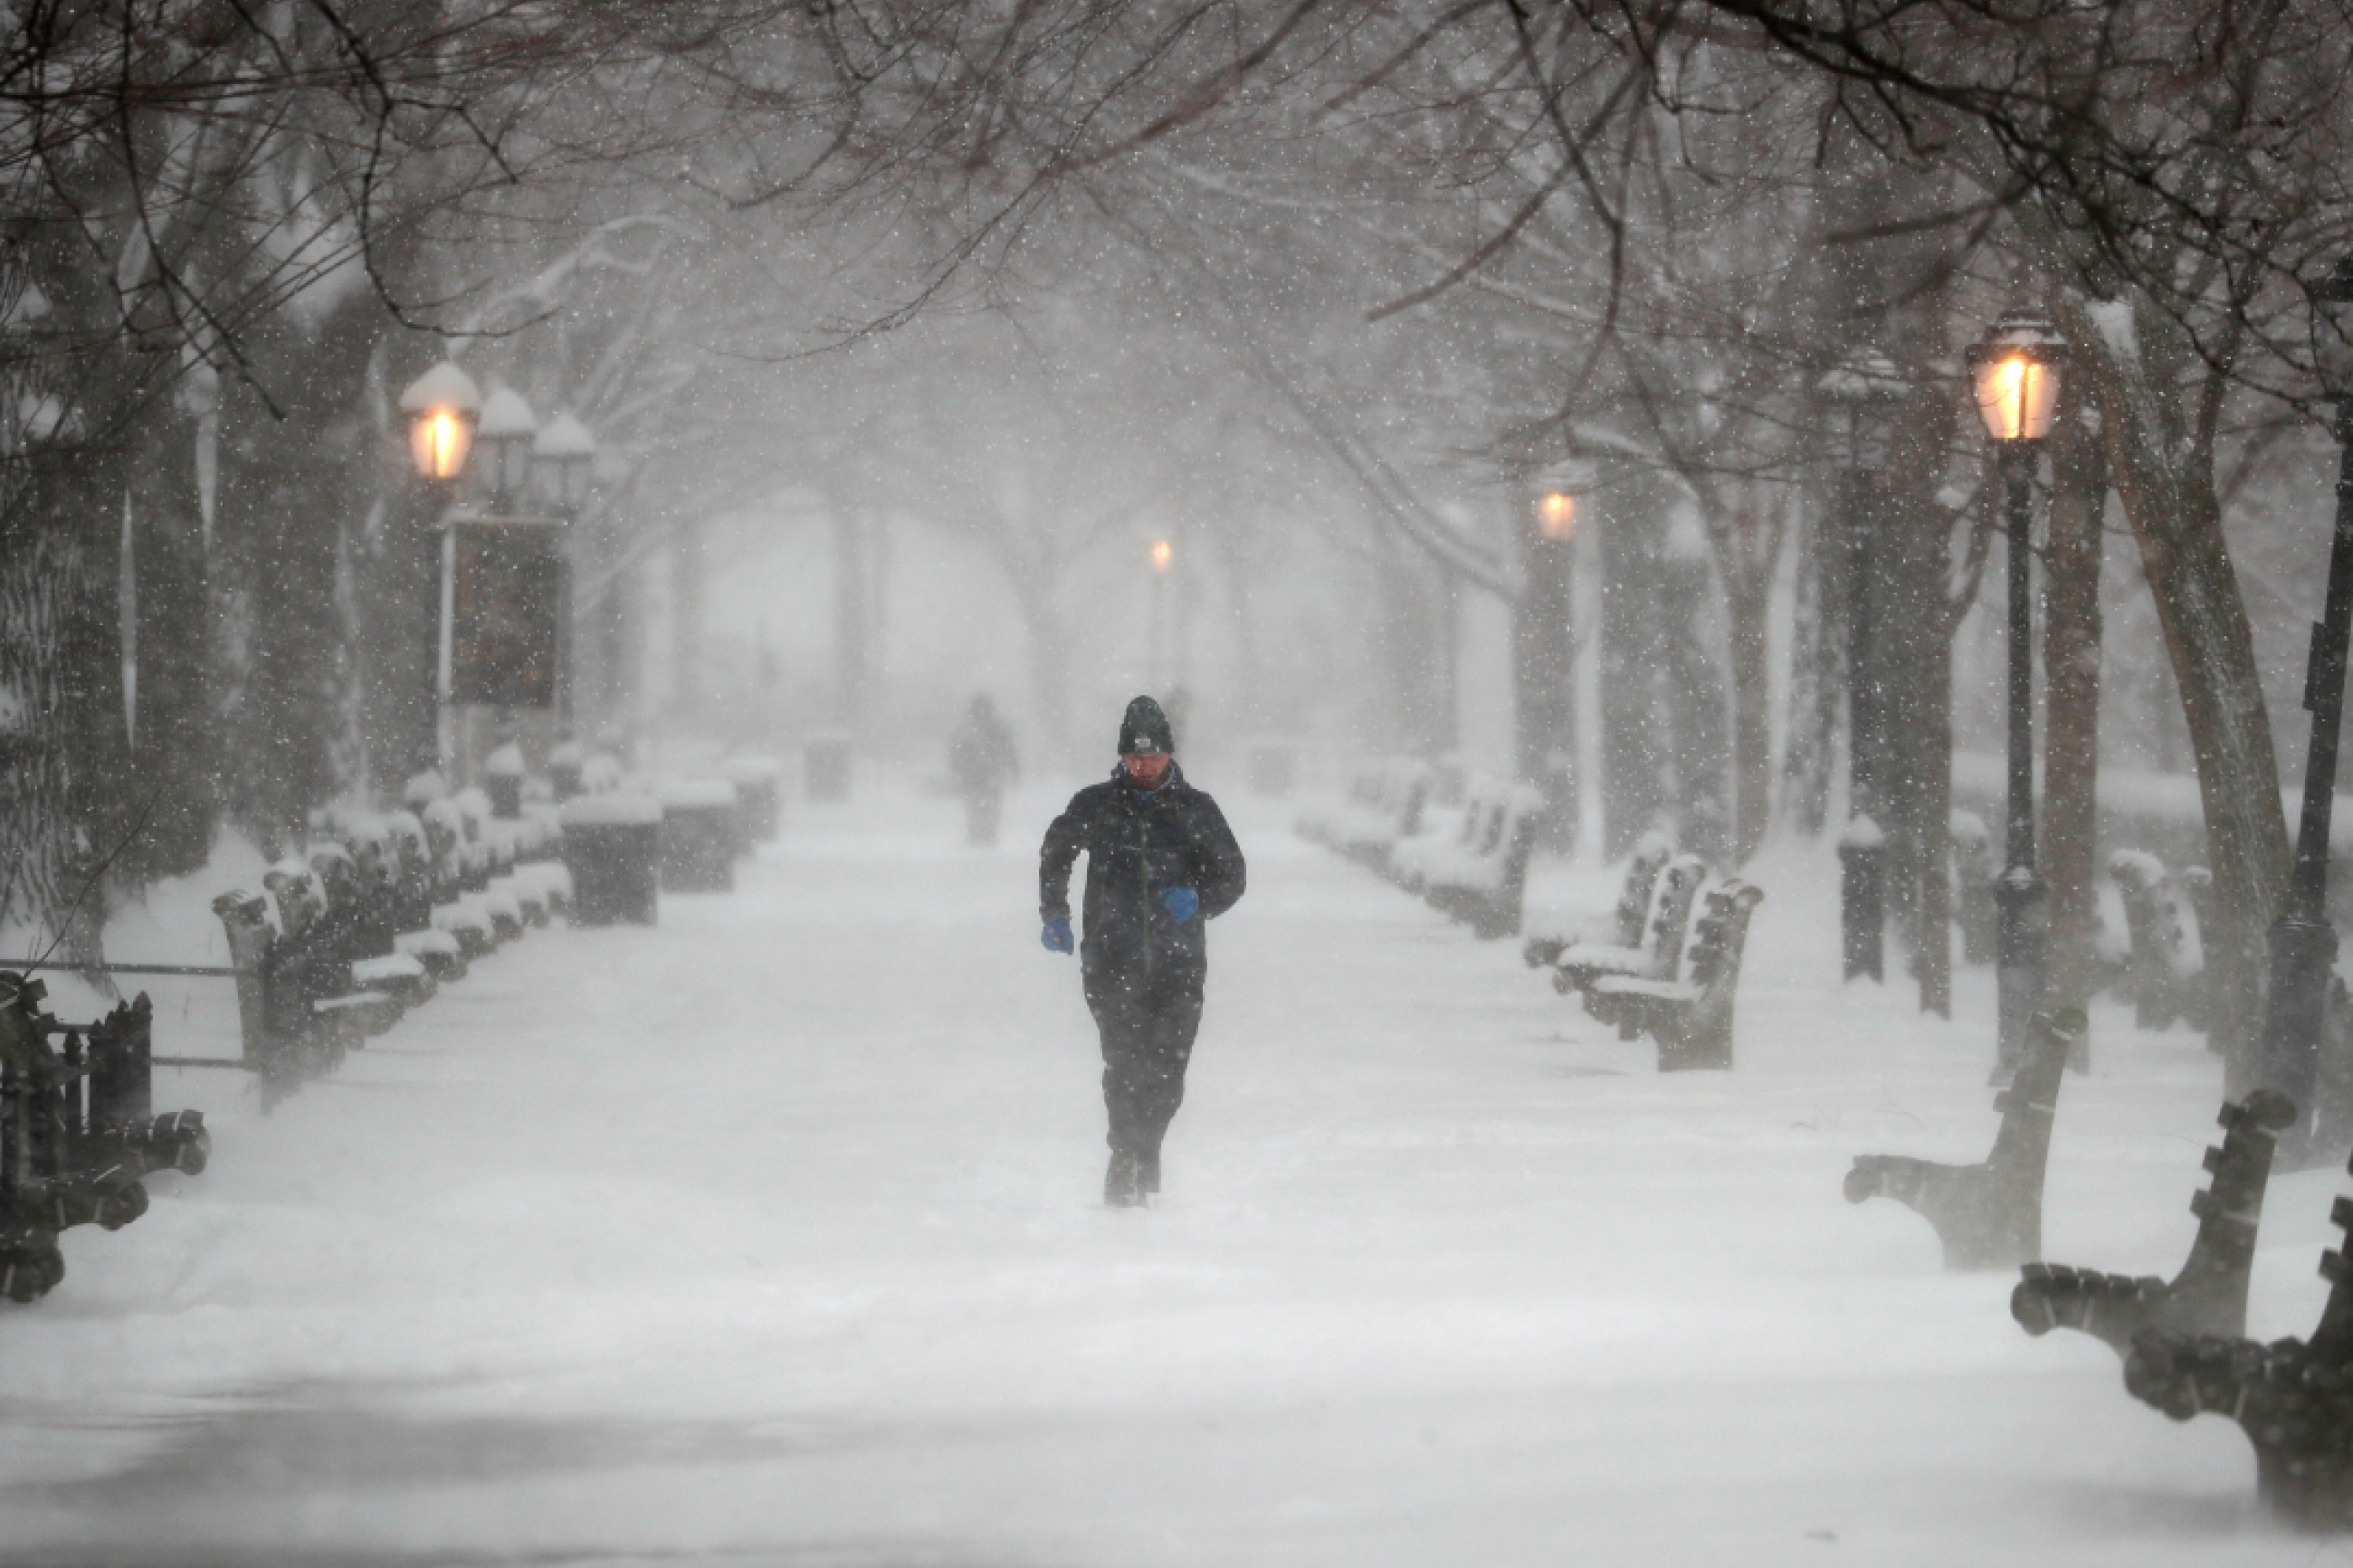 A man runs in Riverside Park during a winter storm on the upper west side of Manhattan in New York City, New York, on February 1, 2021. REUTERS/Mike Segar